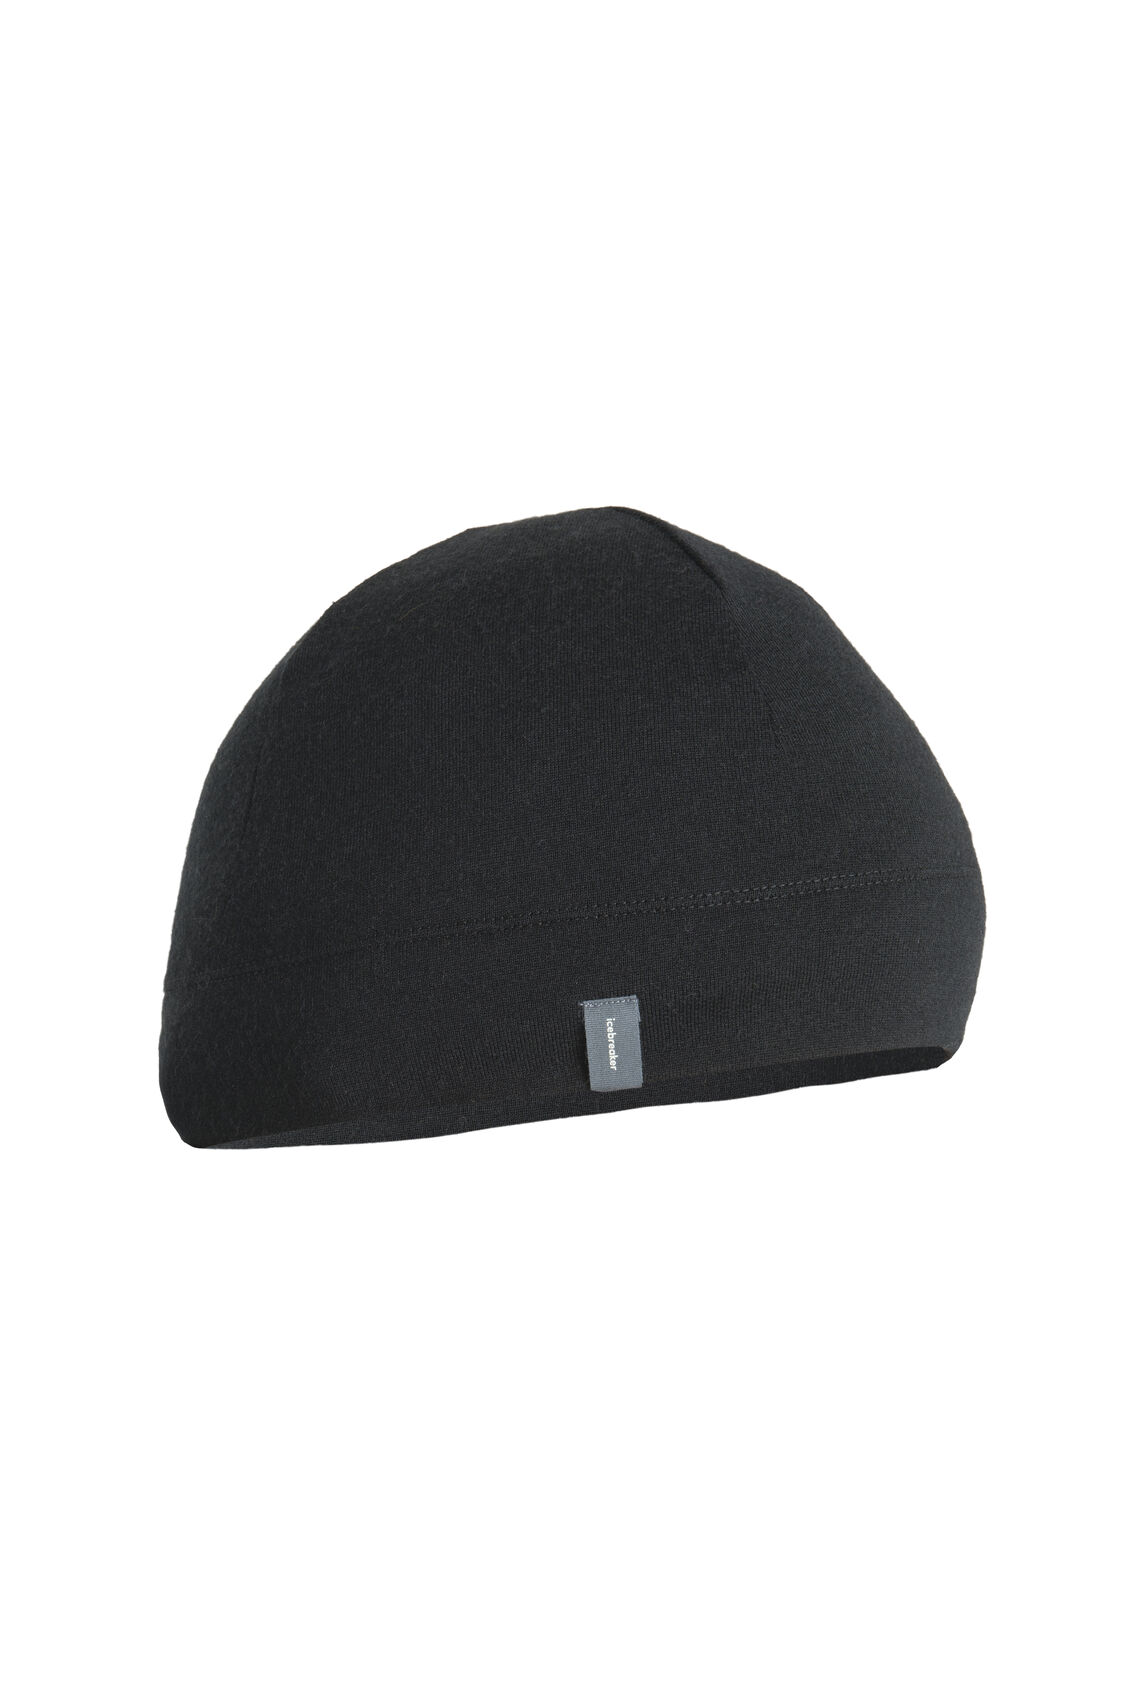 Womens Merino 260 Ridge Beanie A heavyweight merino wool hat for running, hiking and staying active on the coldest winter days, the 260 Ridge Beanie insulates and breathes whether you're on the move or standing still.